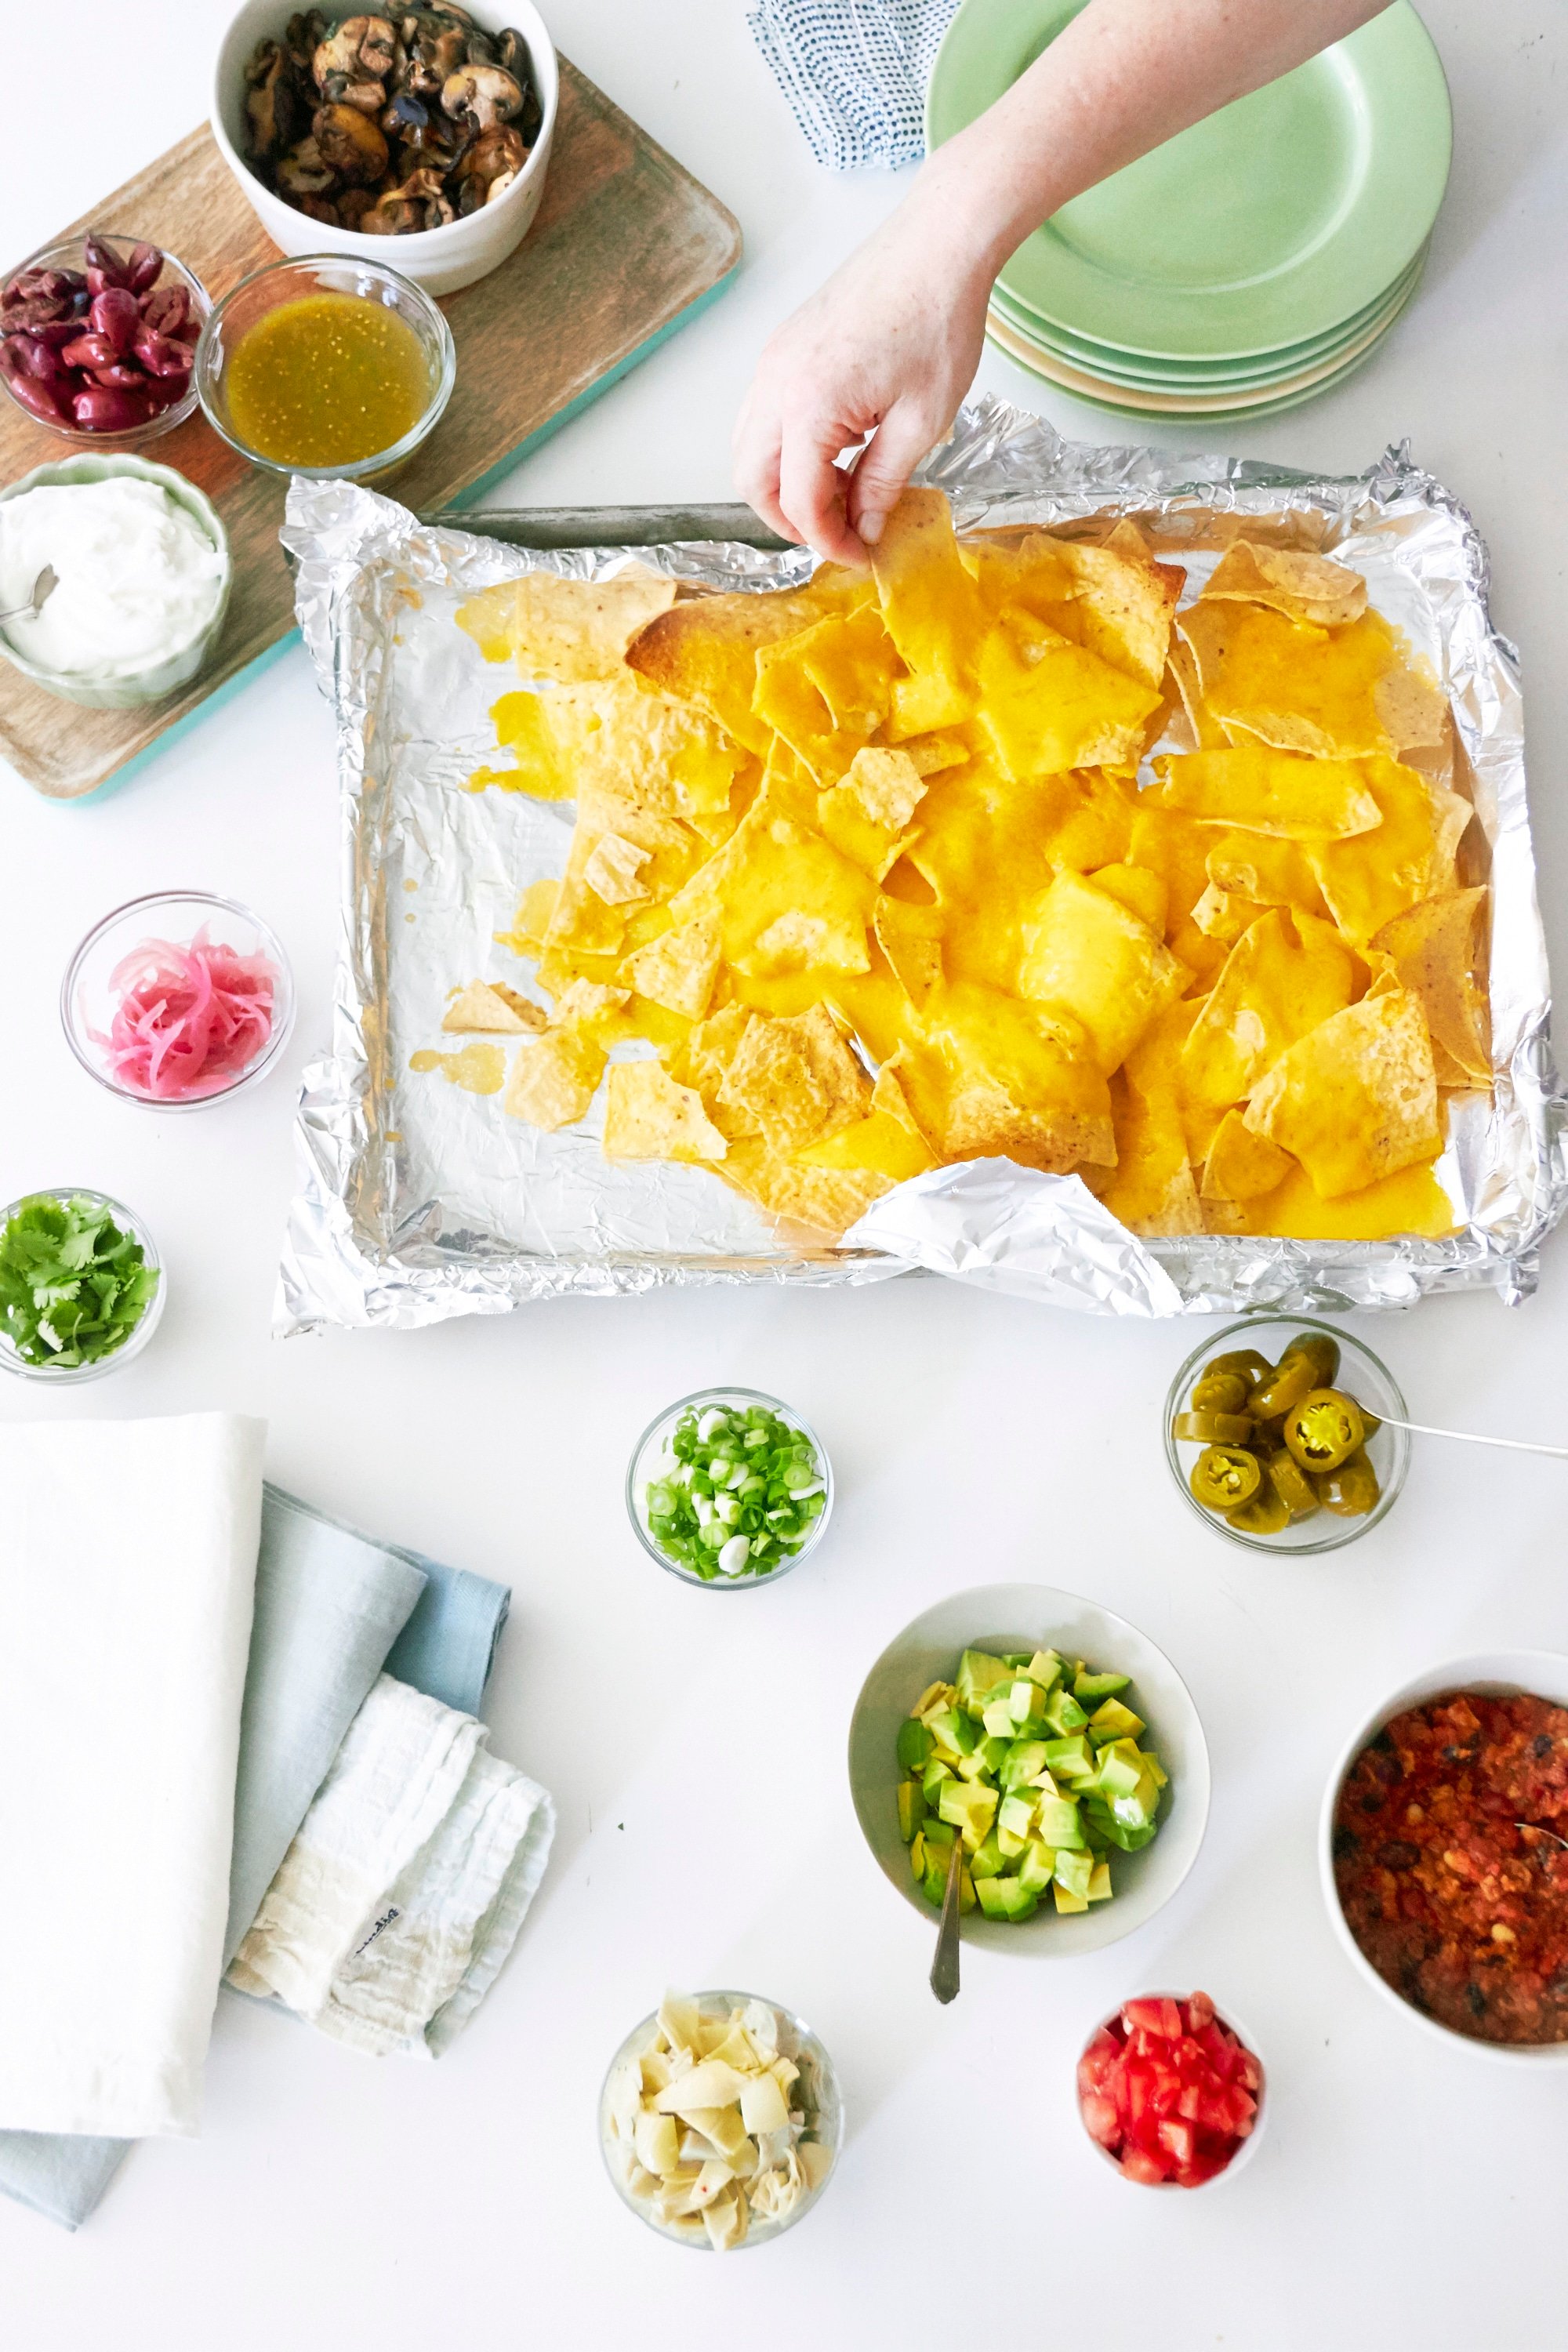 Woman taking a nacho from a baking sheet with nachos on it, surrounded by various topping choices.